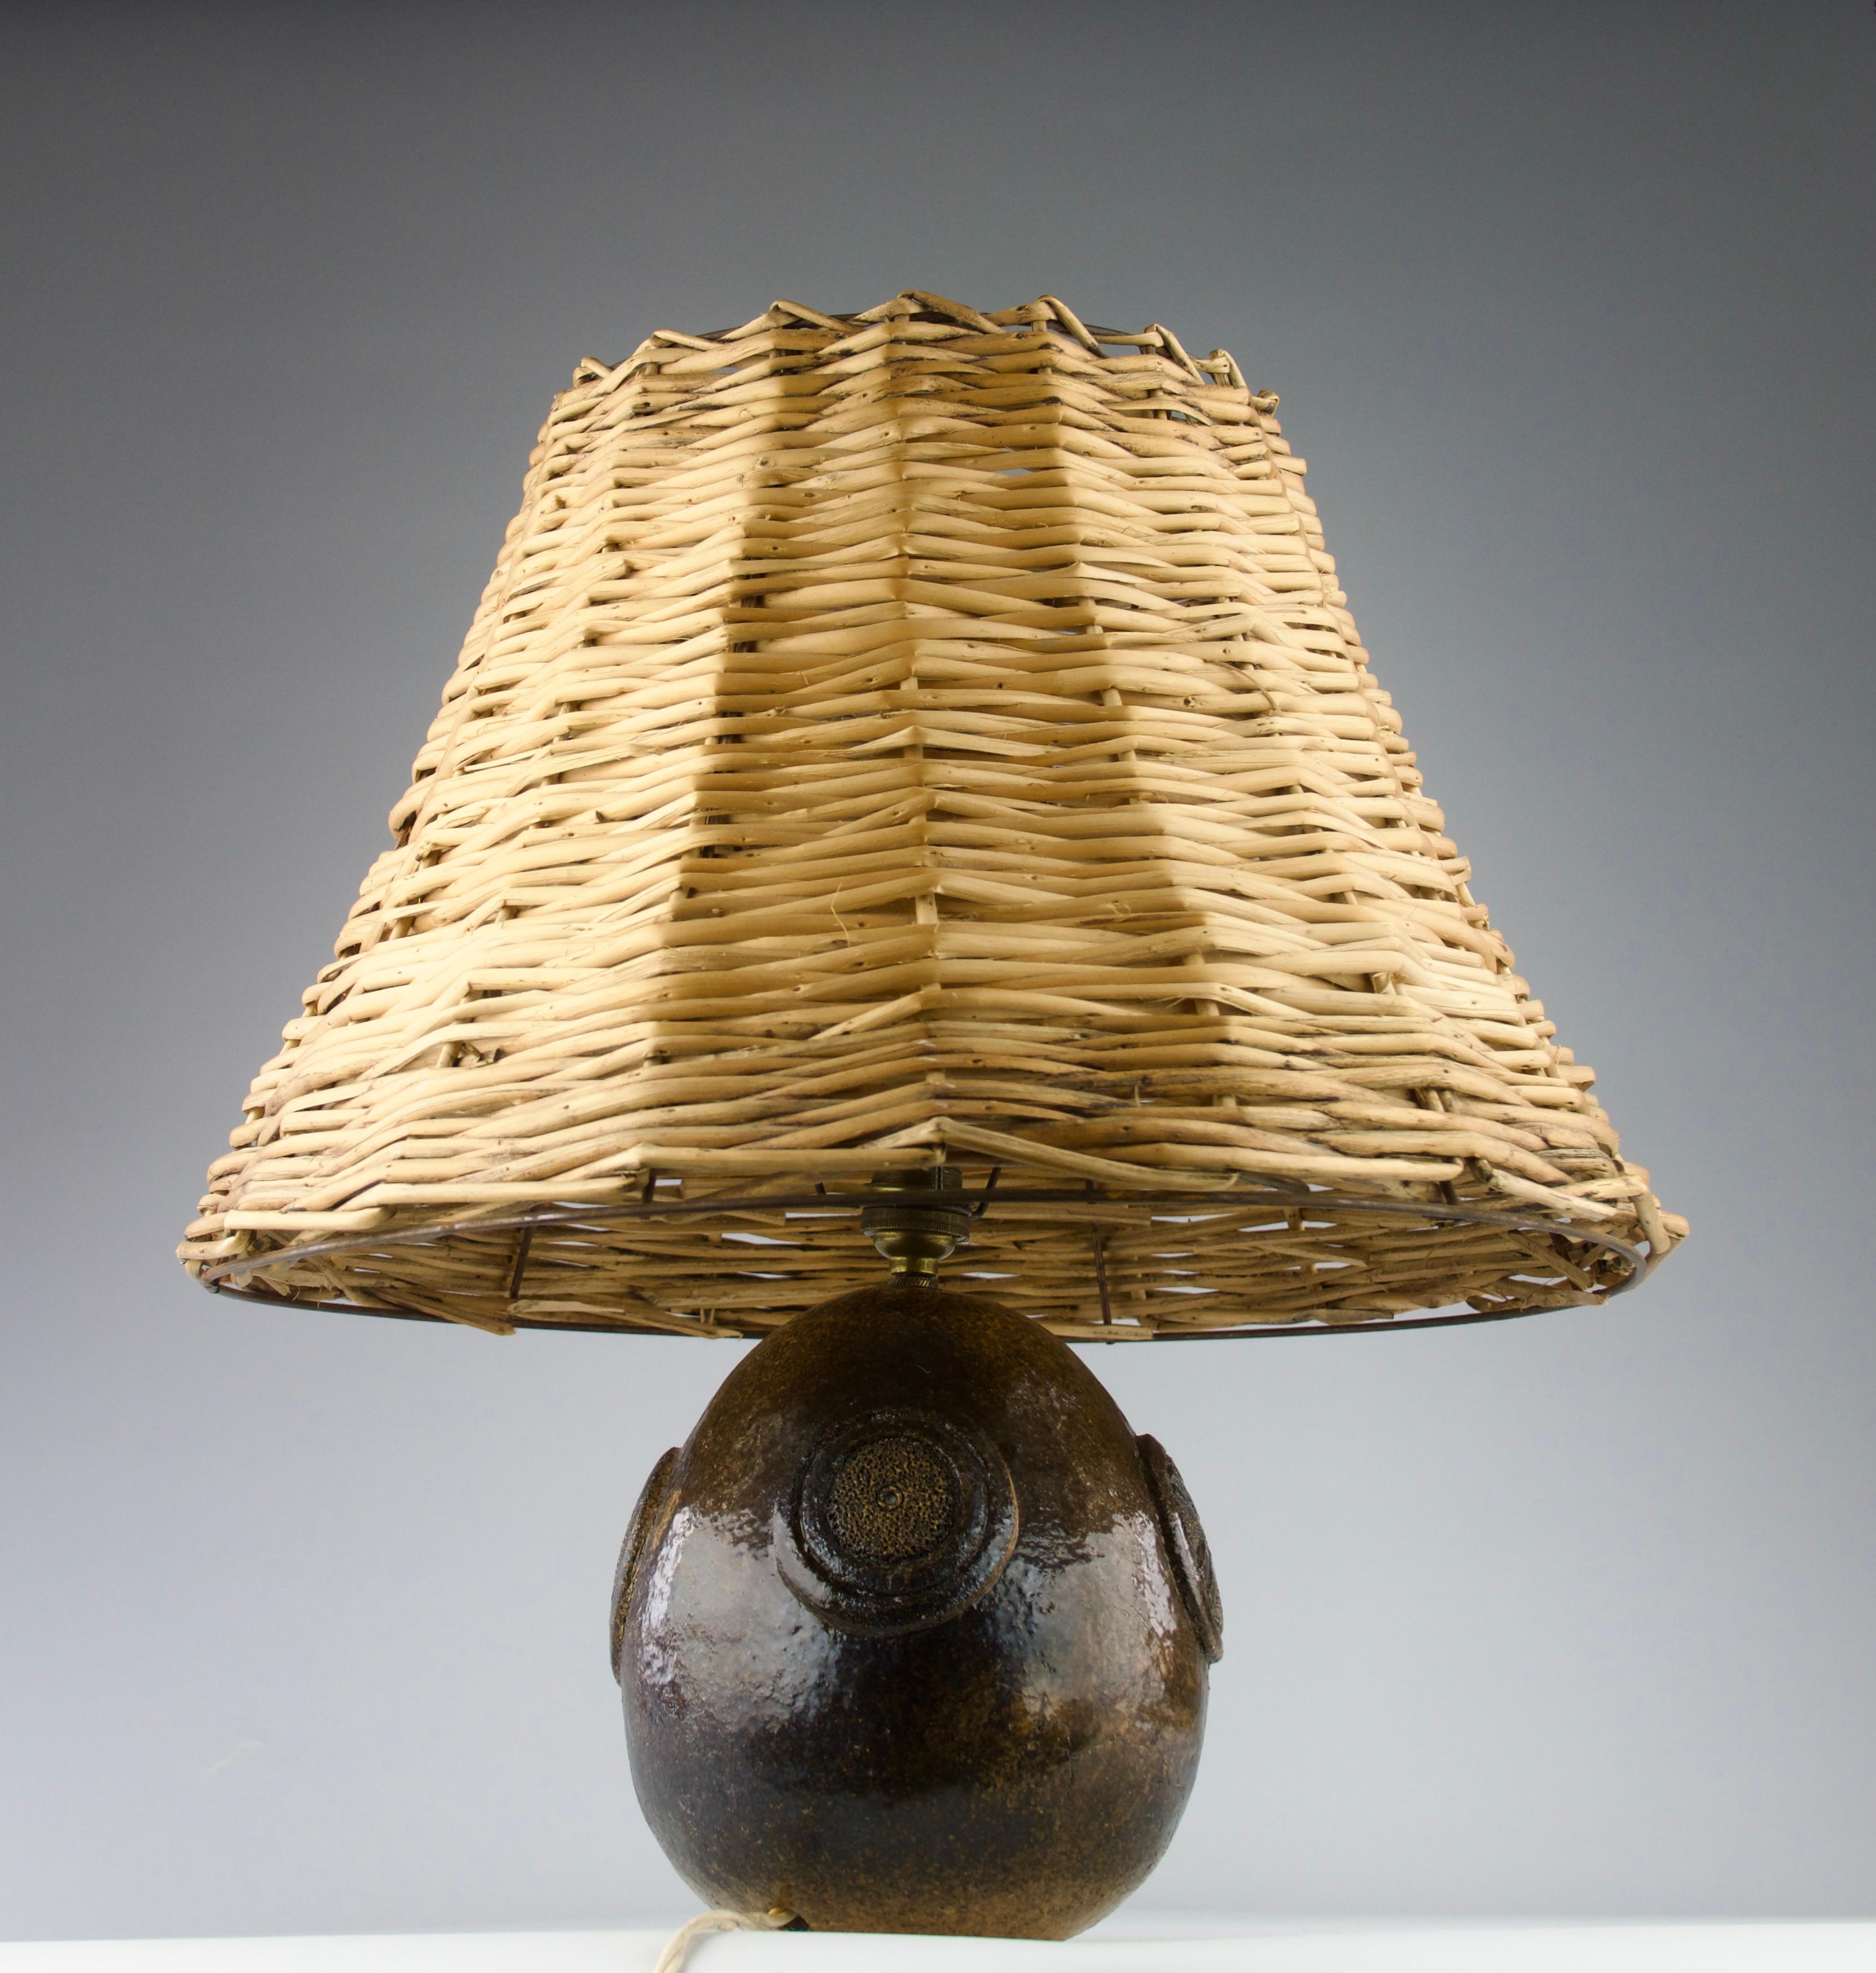 Beautiful ceramic table lamp with geometric motifs and a rattan lampshade, France 1950s.

Excellent condition.

Dimensions in cm ( H x D ) : 44 x 40.5
Dimensions of the ceramic base in cm ( H x D) : 17 x 15, with the light fixture 21.5 x 15

Secure